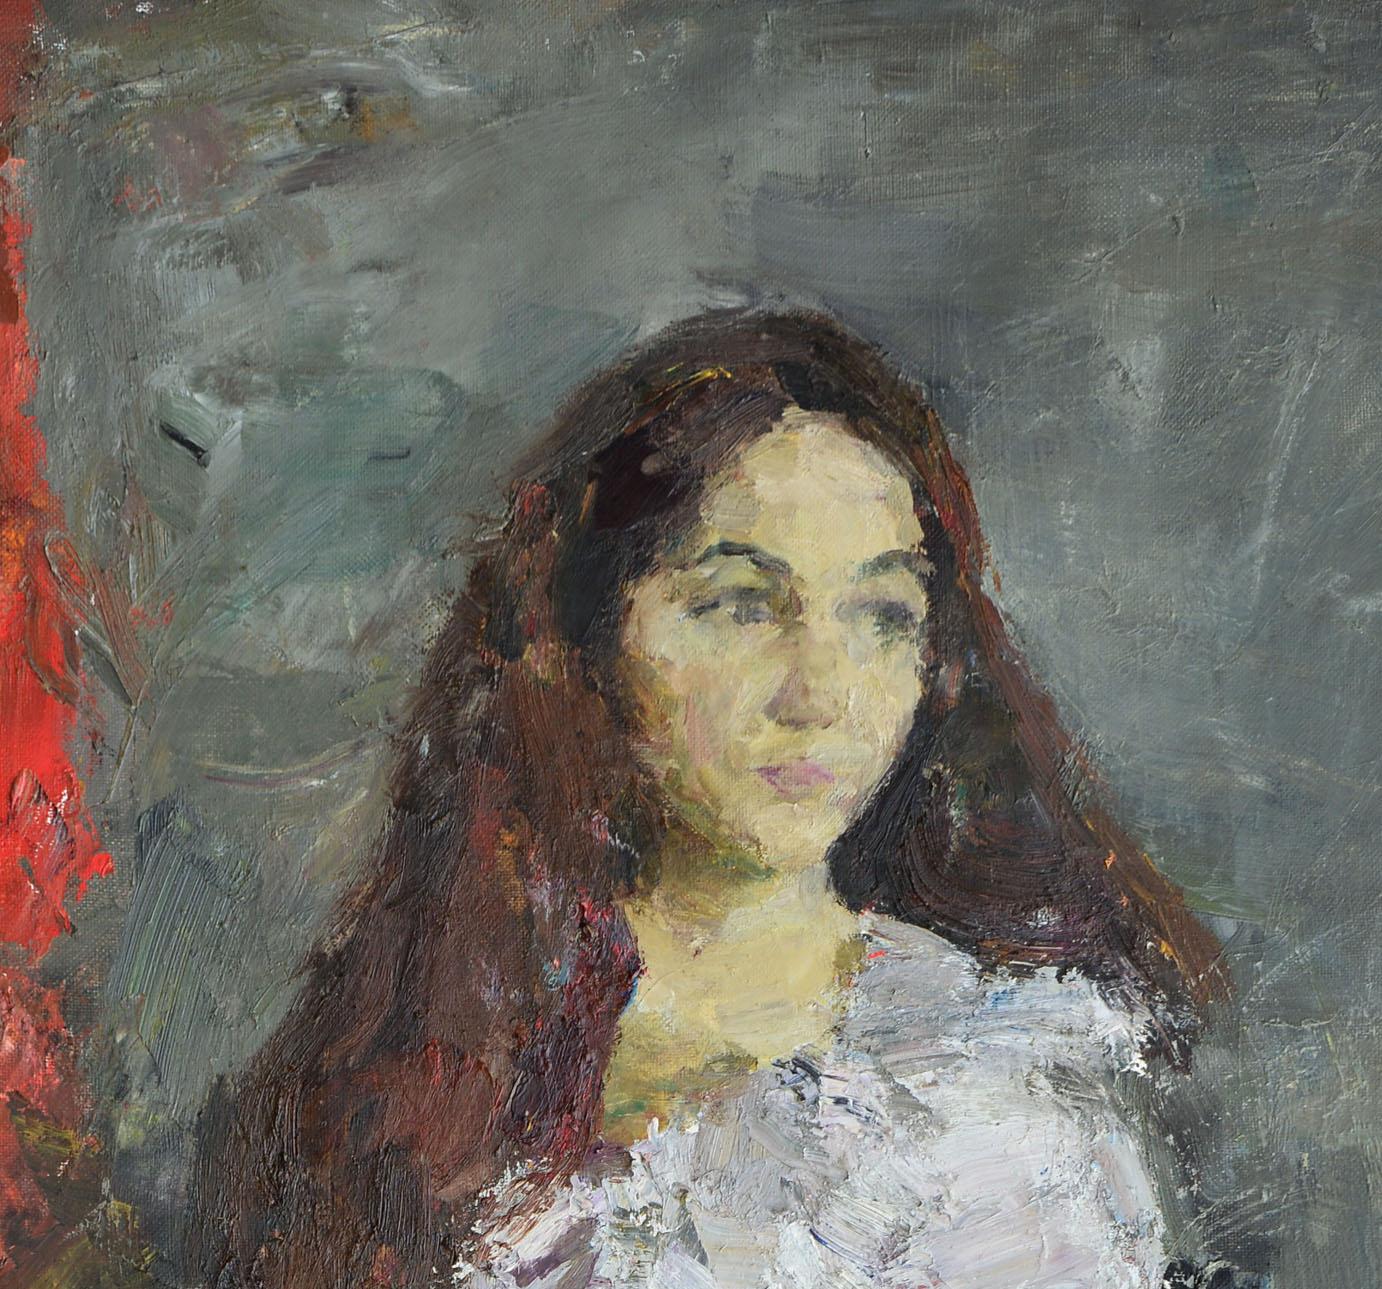 Portrait of a Woman - Abstract Impressionist Painting by Sergei Skripitsyn